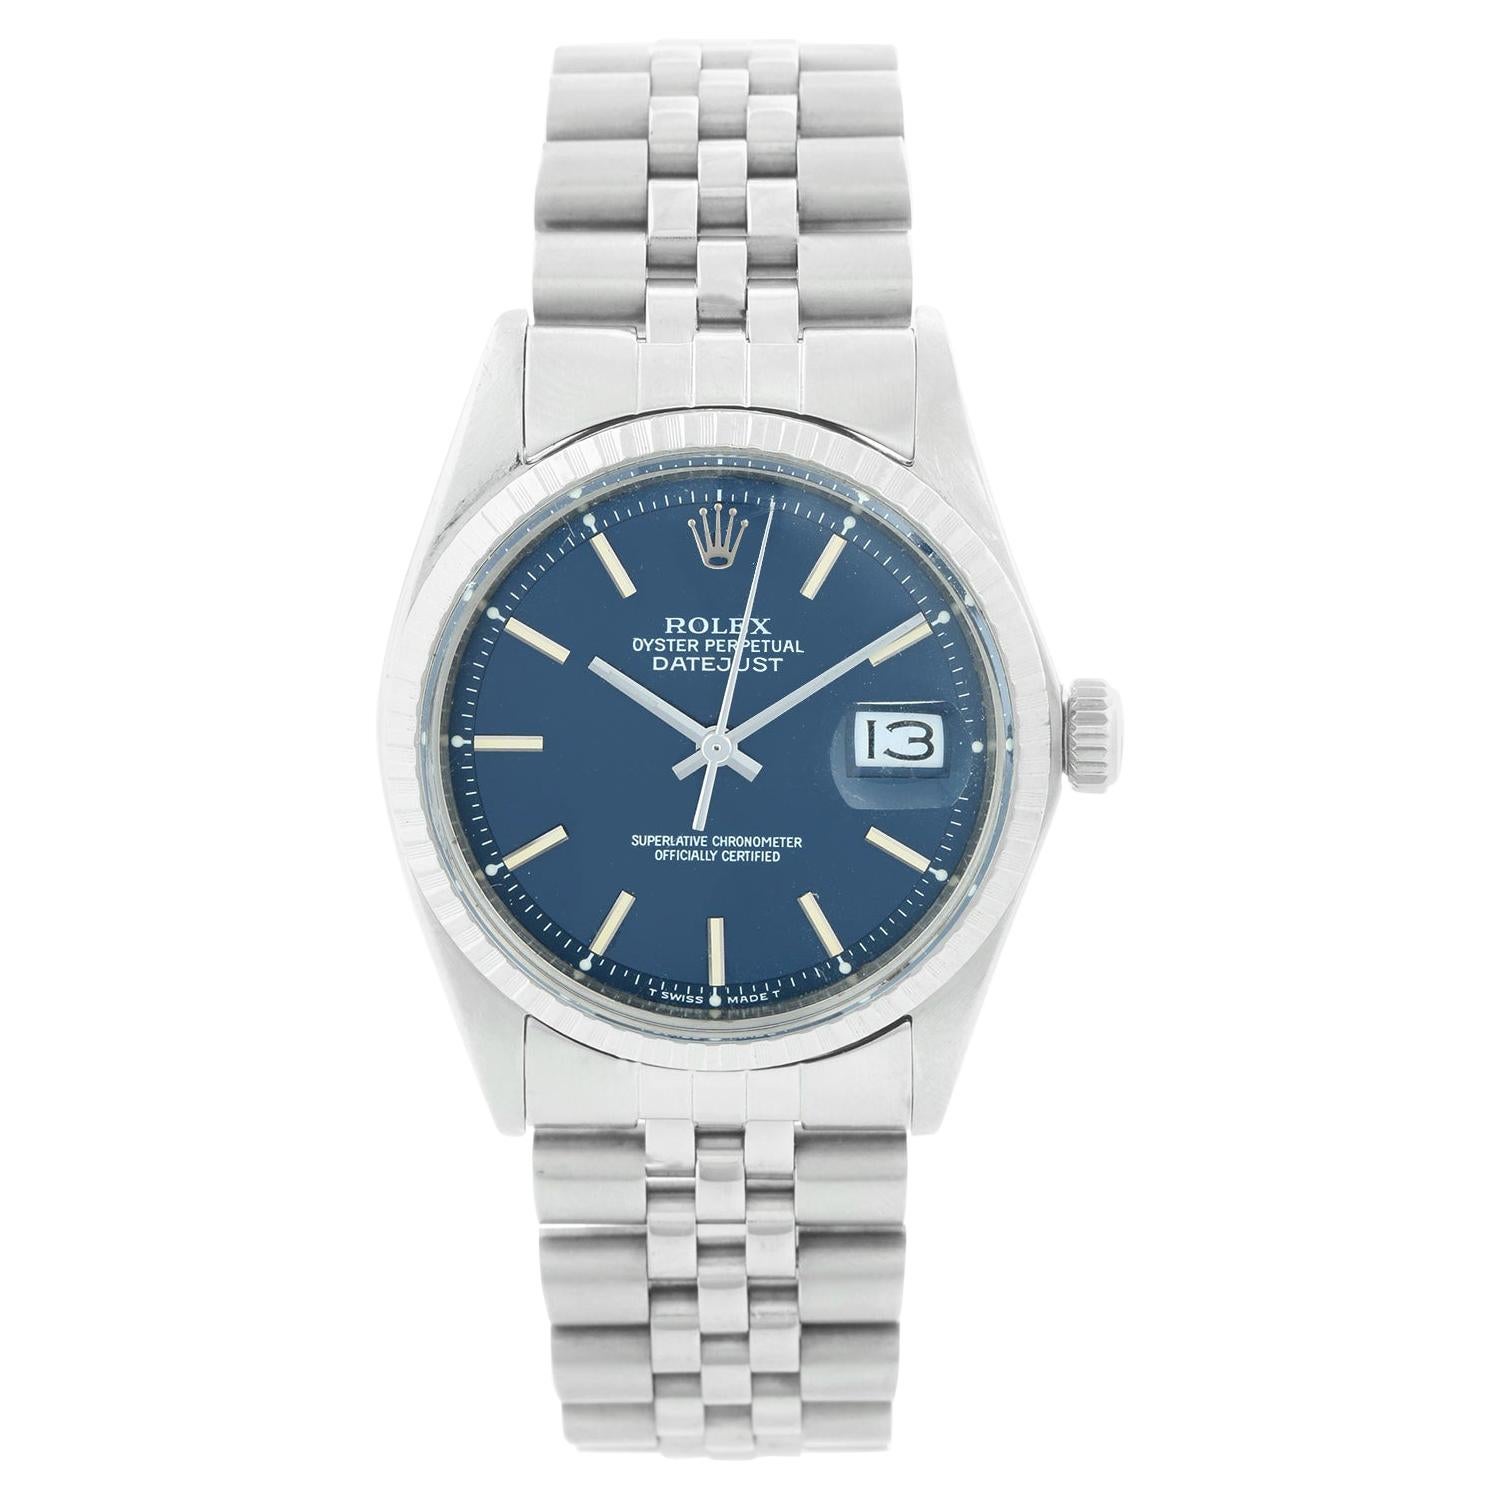 Rolex Datejust Men's Steel Automatic Winding Rare Blue Dial Watch 1603